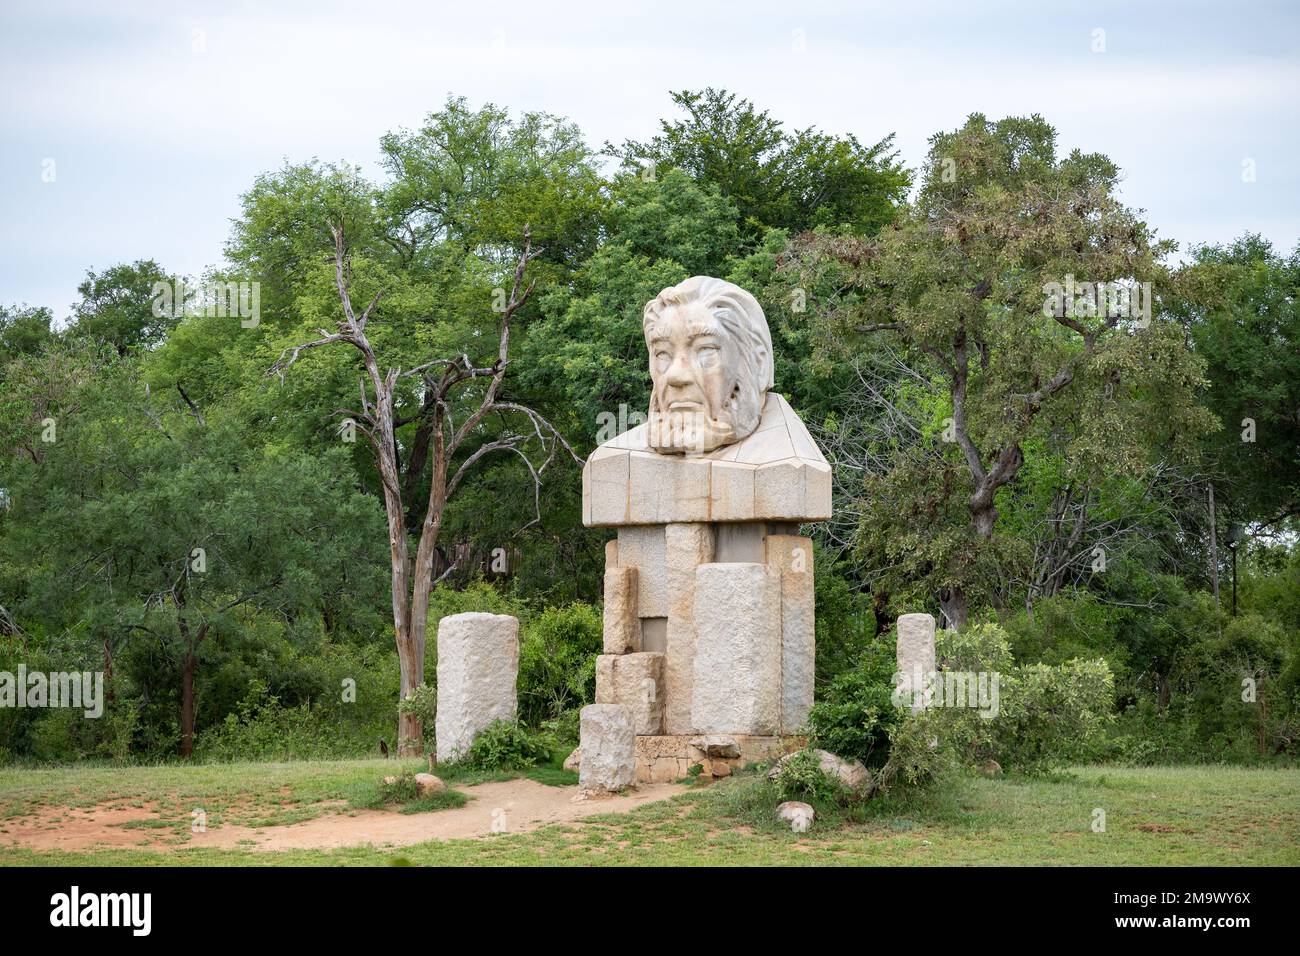 Statue of Paul Kruger at the Kruger National Park, South Africa. Stock Photo